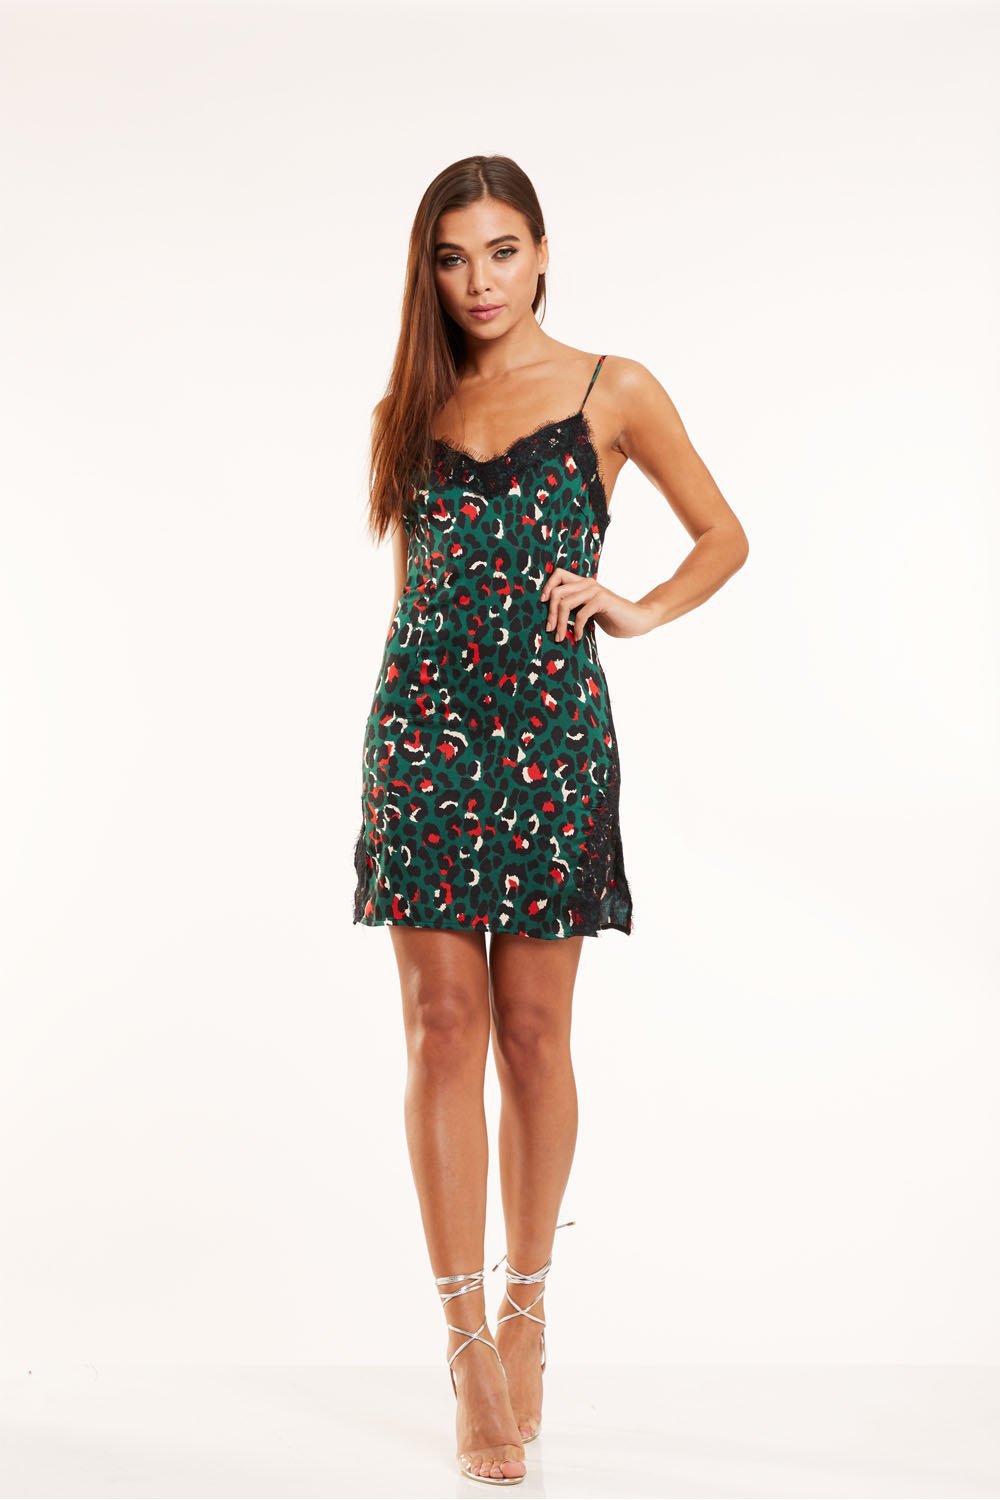 green and red leopard print dress